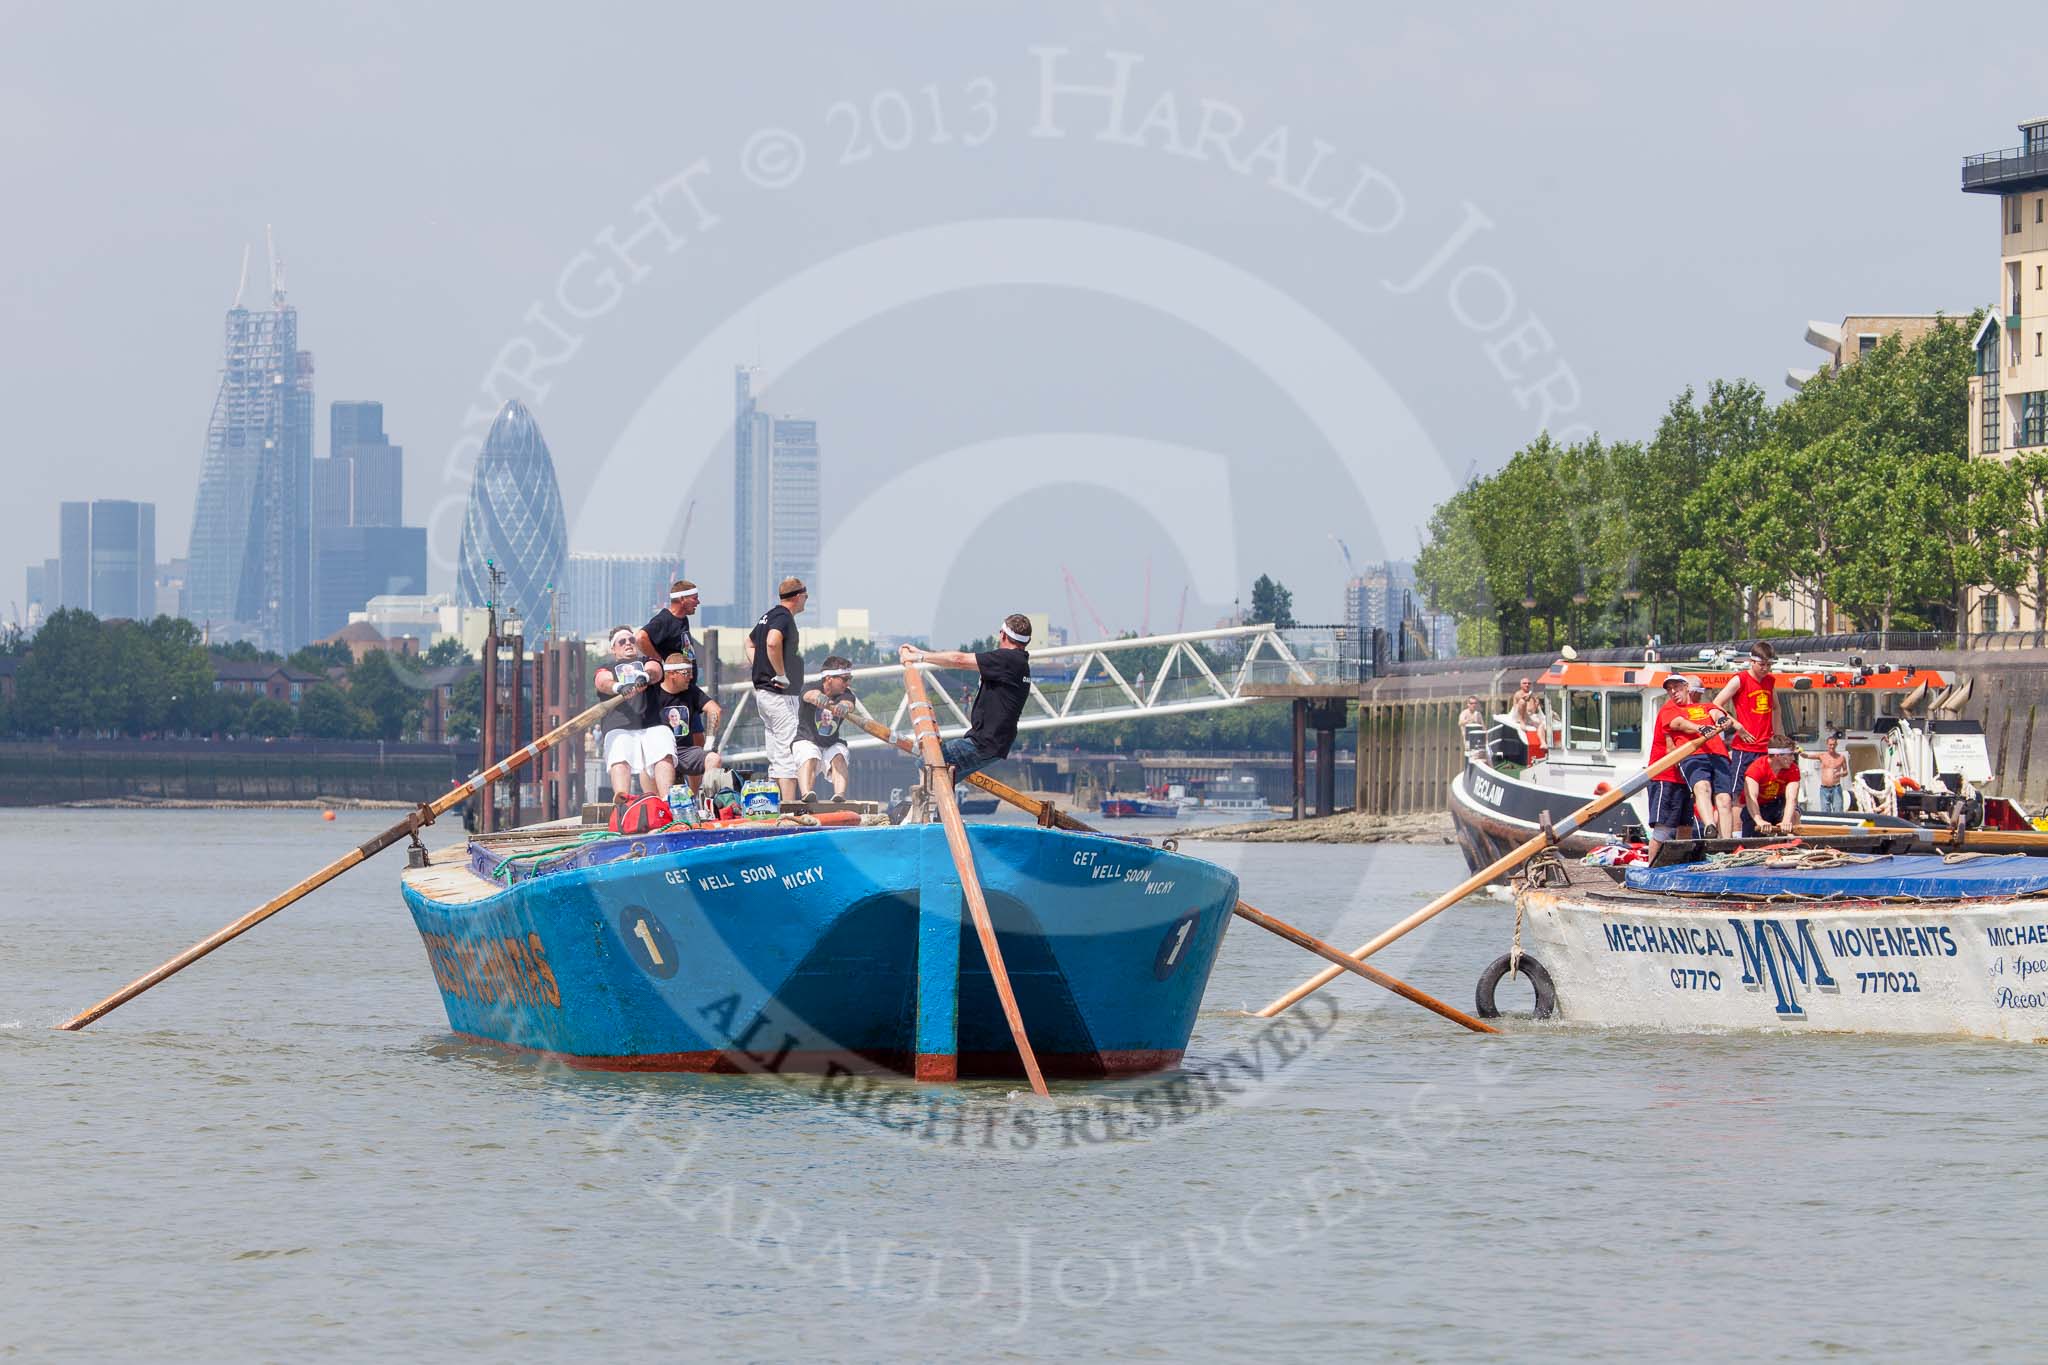 TOW River Thames Barge Driving Race 2013: Rear view of barge "Darren Lacey", by Princess Pocahontas, during the race, approaching Masthouse Terrace Pier. In the background the skyscrapers of the City of London, including the "Gherkin". On the right of "Darren Lacey" is barge "Spirit of Mountabatten", by Mechanical Movements and Enabling Services Ltd..
River Thames between Greenwich and Westminster,
London,

United Kingdom,
on 13 July 2013 at 12:42, image #178